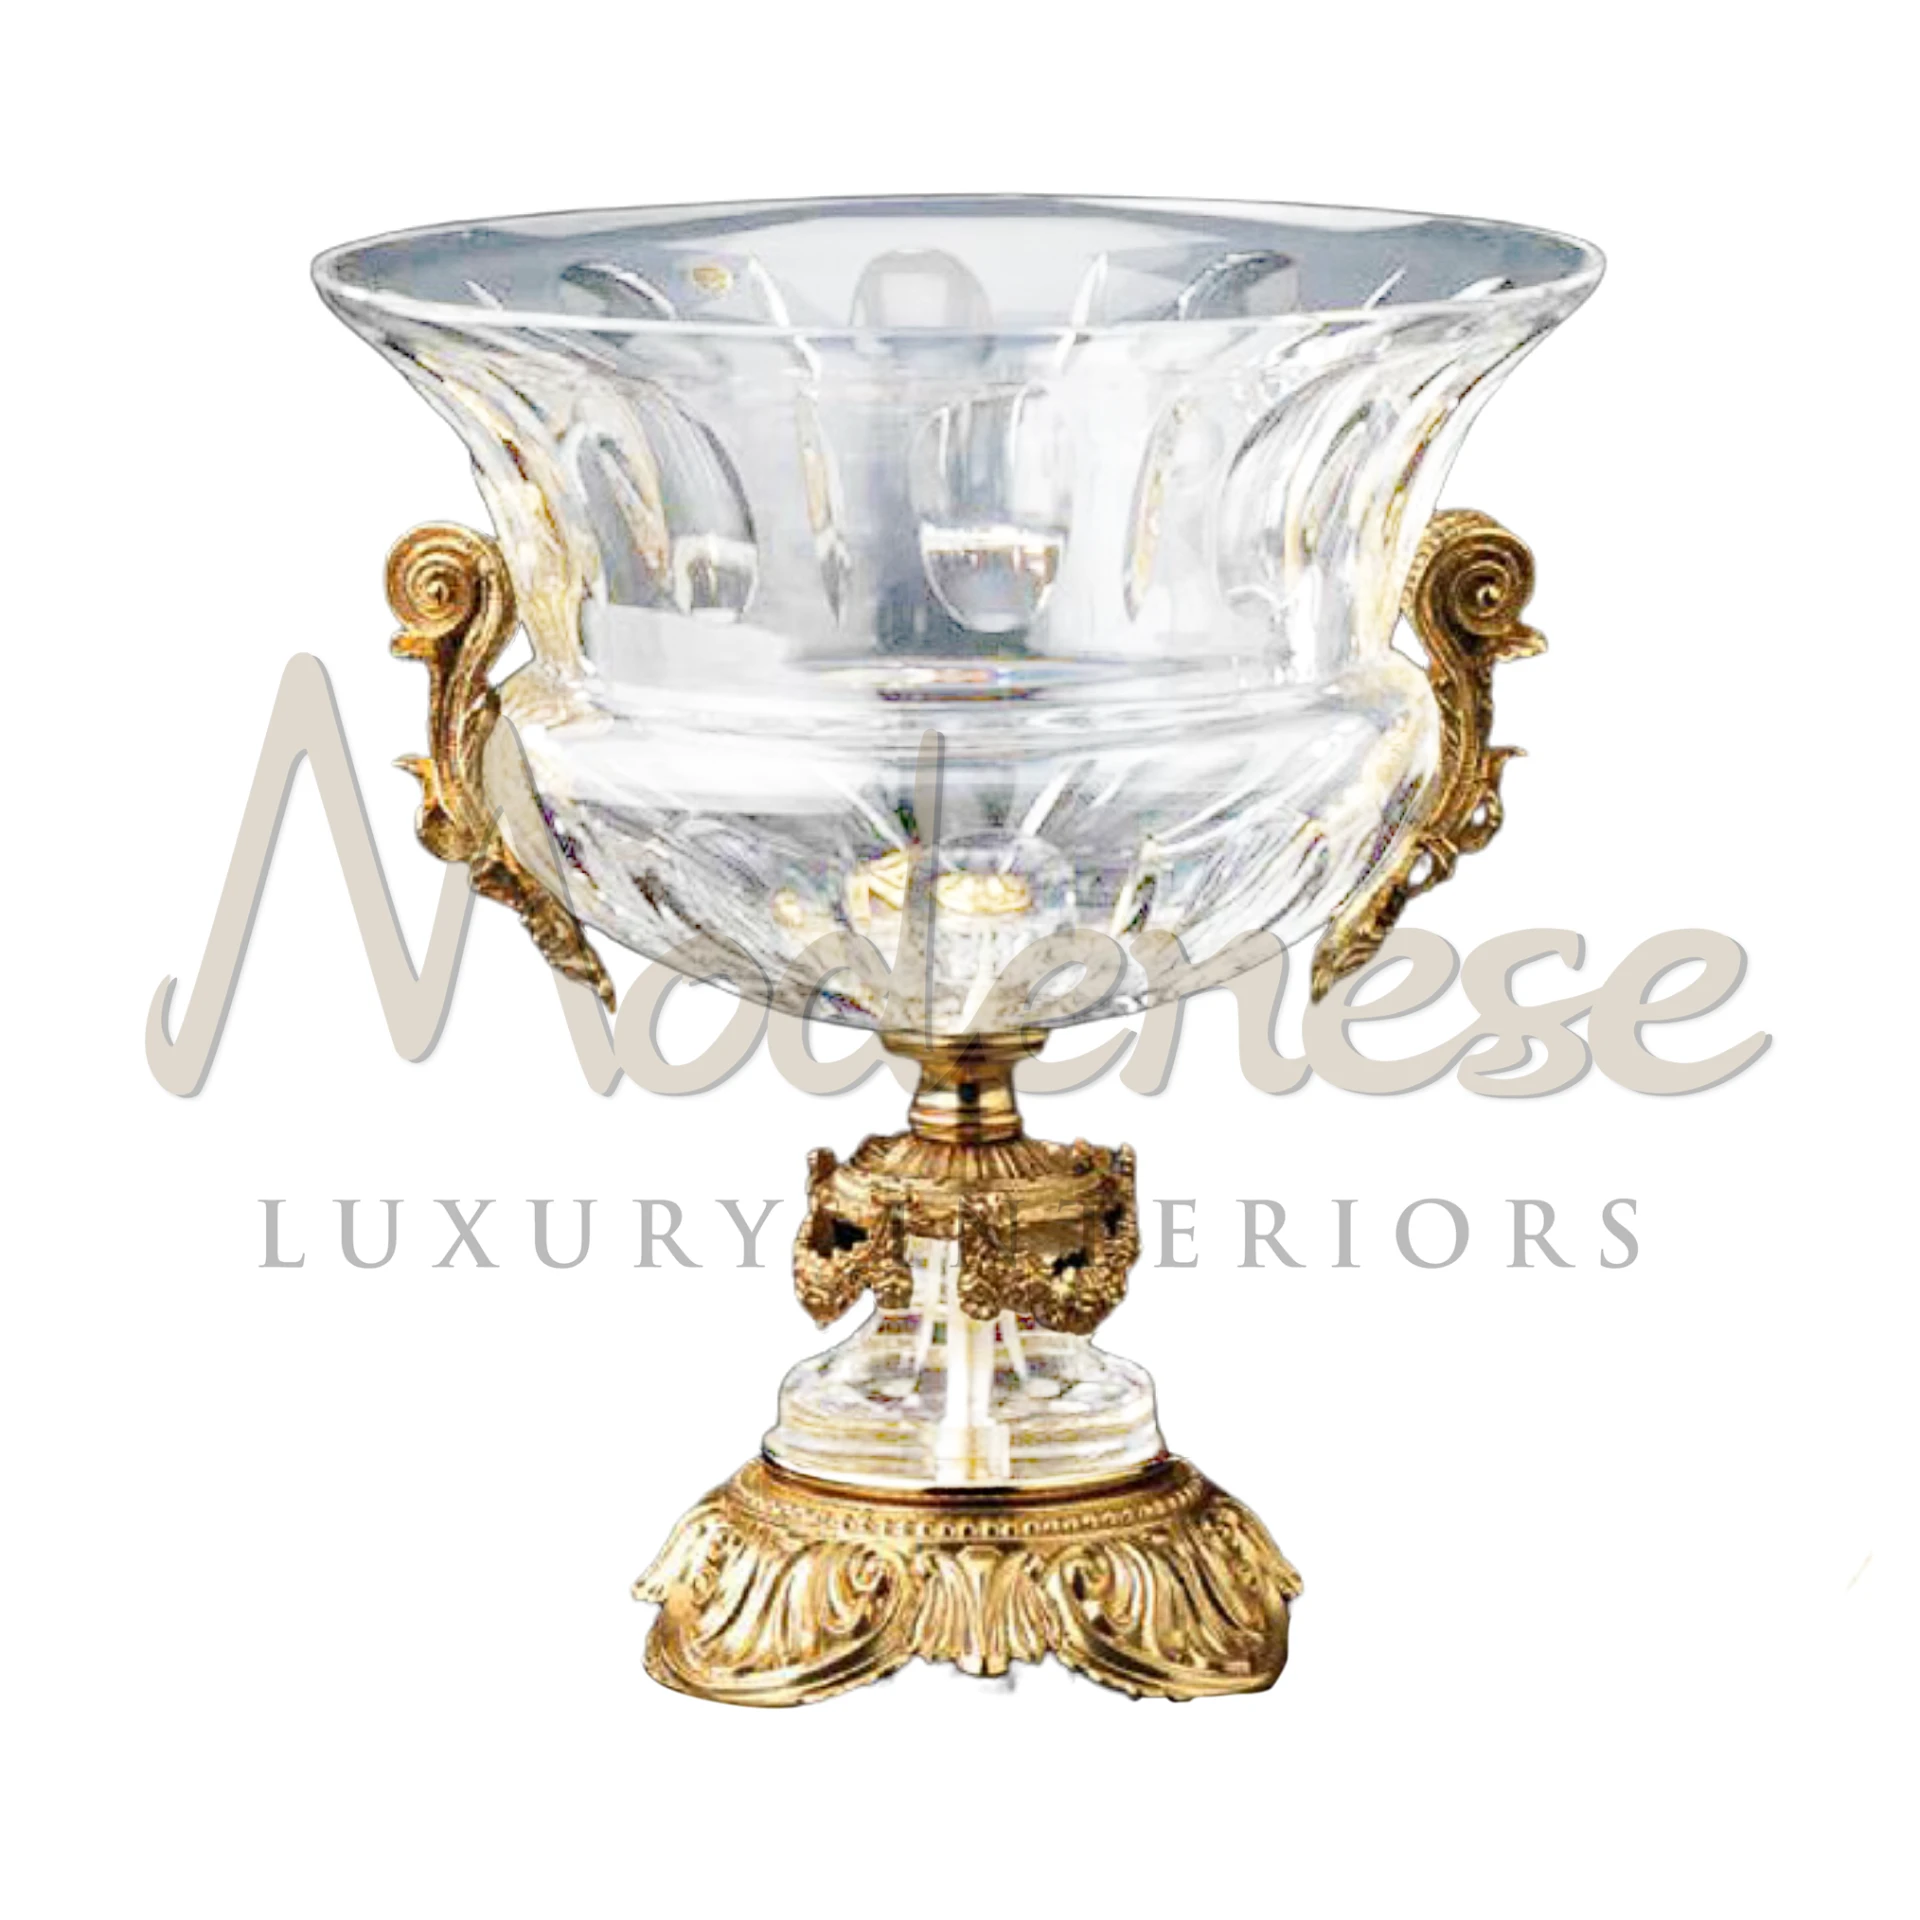 Classical Pedestal Vase, ranging from ornate to simple designs, embodies timeless elegance and luxury in classic and baroque interior styles.